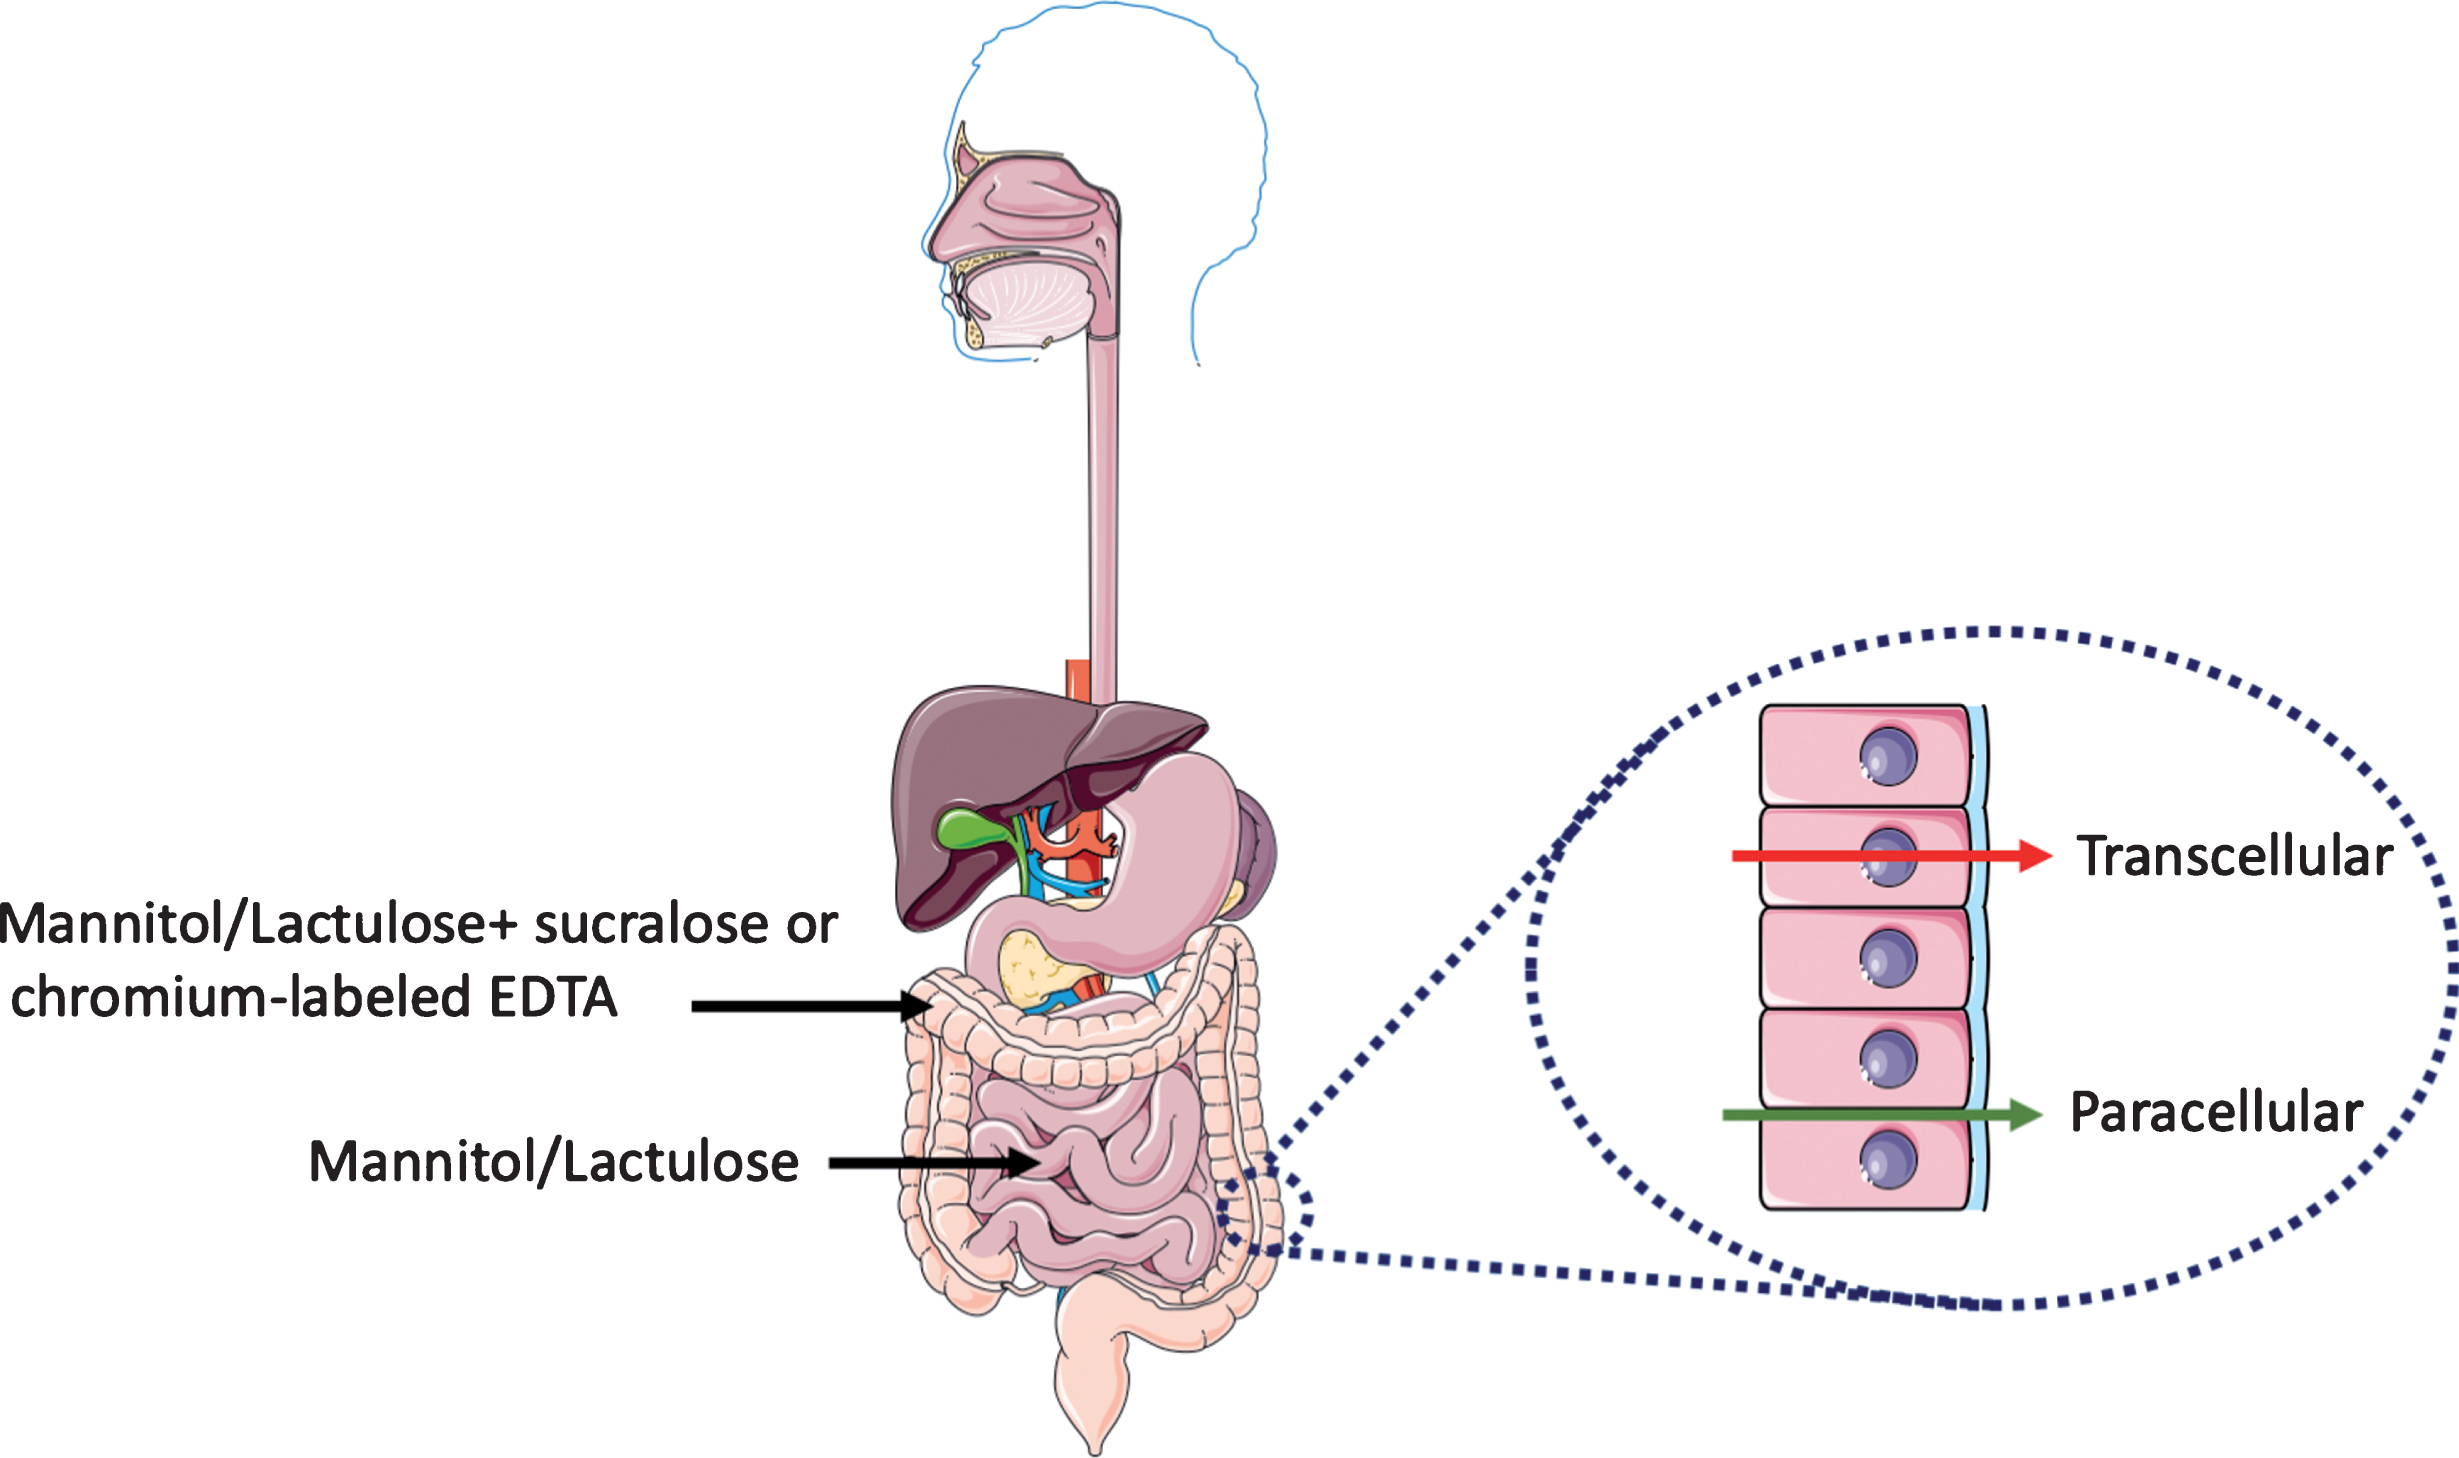 Evaluation of intestinal permeability. Urinary excretion of orally ingested non-metabolizable sugars of different sizes provides a reliable non-invasive in vivo read-out of intestinal barrier function. The mannitol/lactulose ratio evaluates the changes in permeability in the small intestine. Changes in the colon permeability is assessed with the addition of either sucralose or chromium-labeled EDTA. At the cellular level, there are two routes for transport of molecules and ions across the epithelium of the gut: across the plasma membrane of the epithelial cells (transcellular route) and across tight junctions between epithelial cells (paracellular route). This figure was created using Servier Medical Art, licensed under the Creative Commons Attribution 3.0 Unported License.